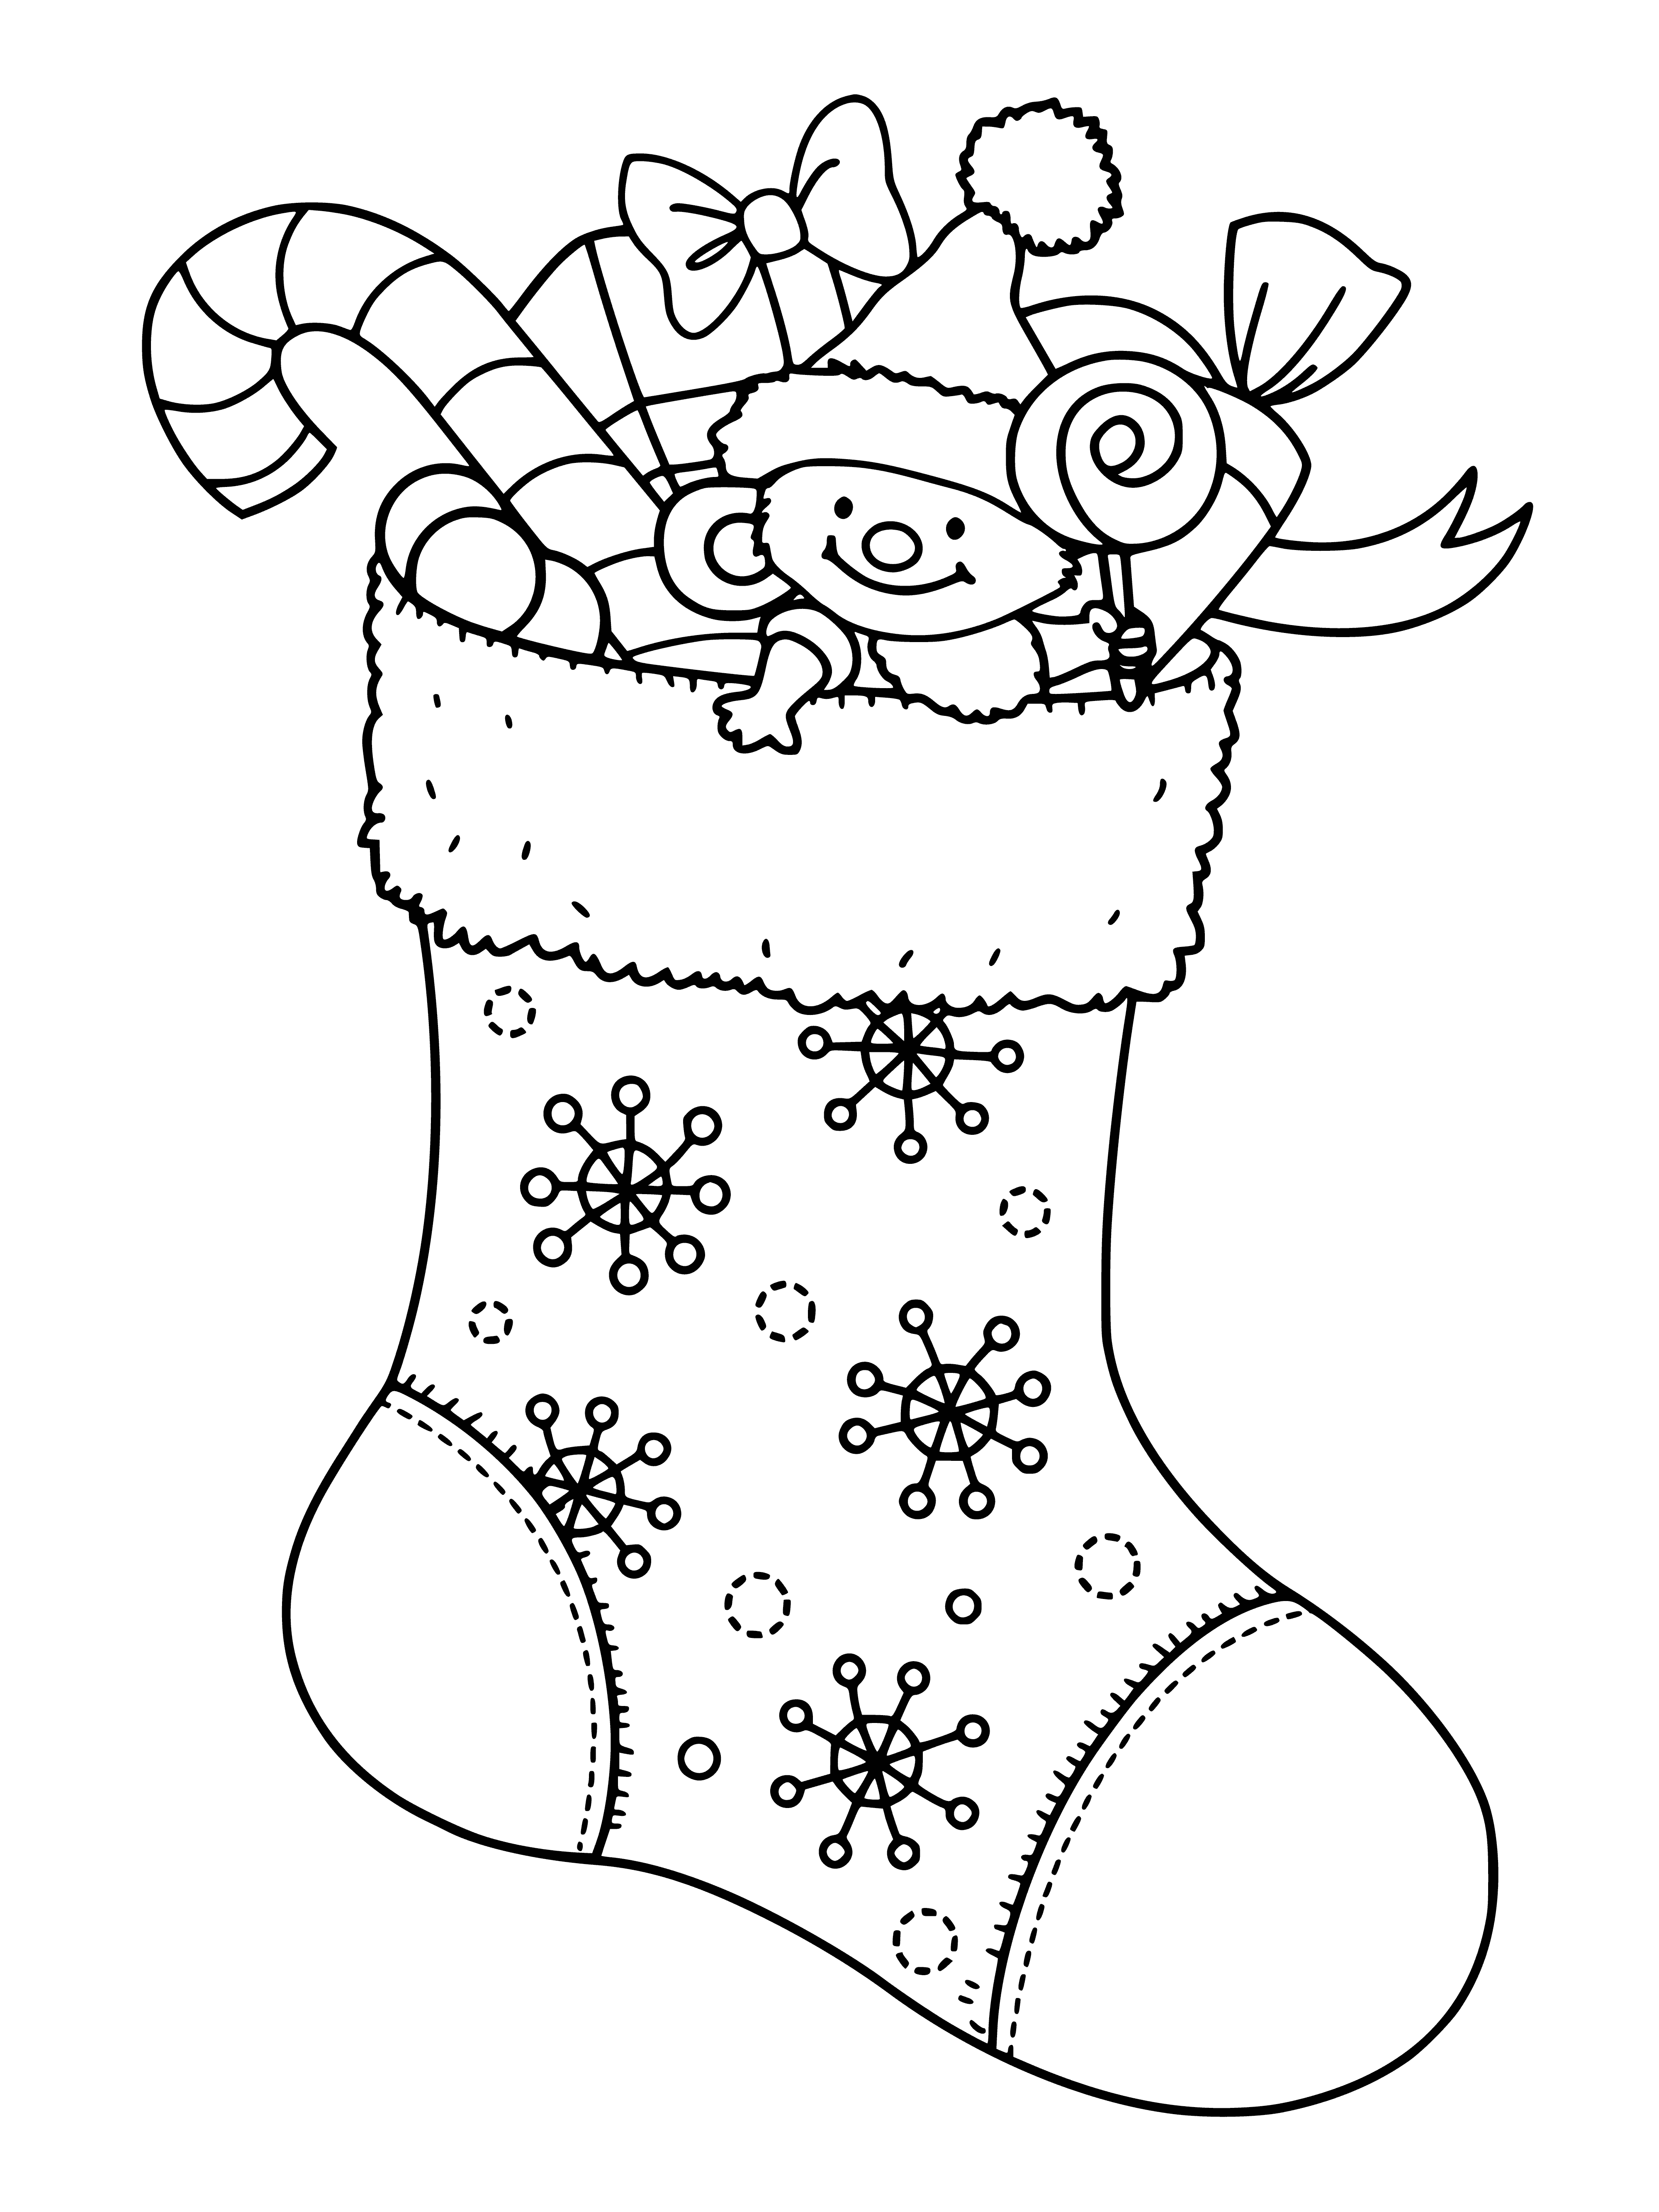 coloring page: Adorable festive pair of Christmas socks: Red with white stripes/Christmas tree and green with red stripes/candy cane.